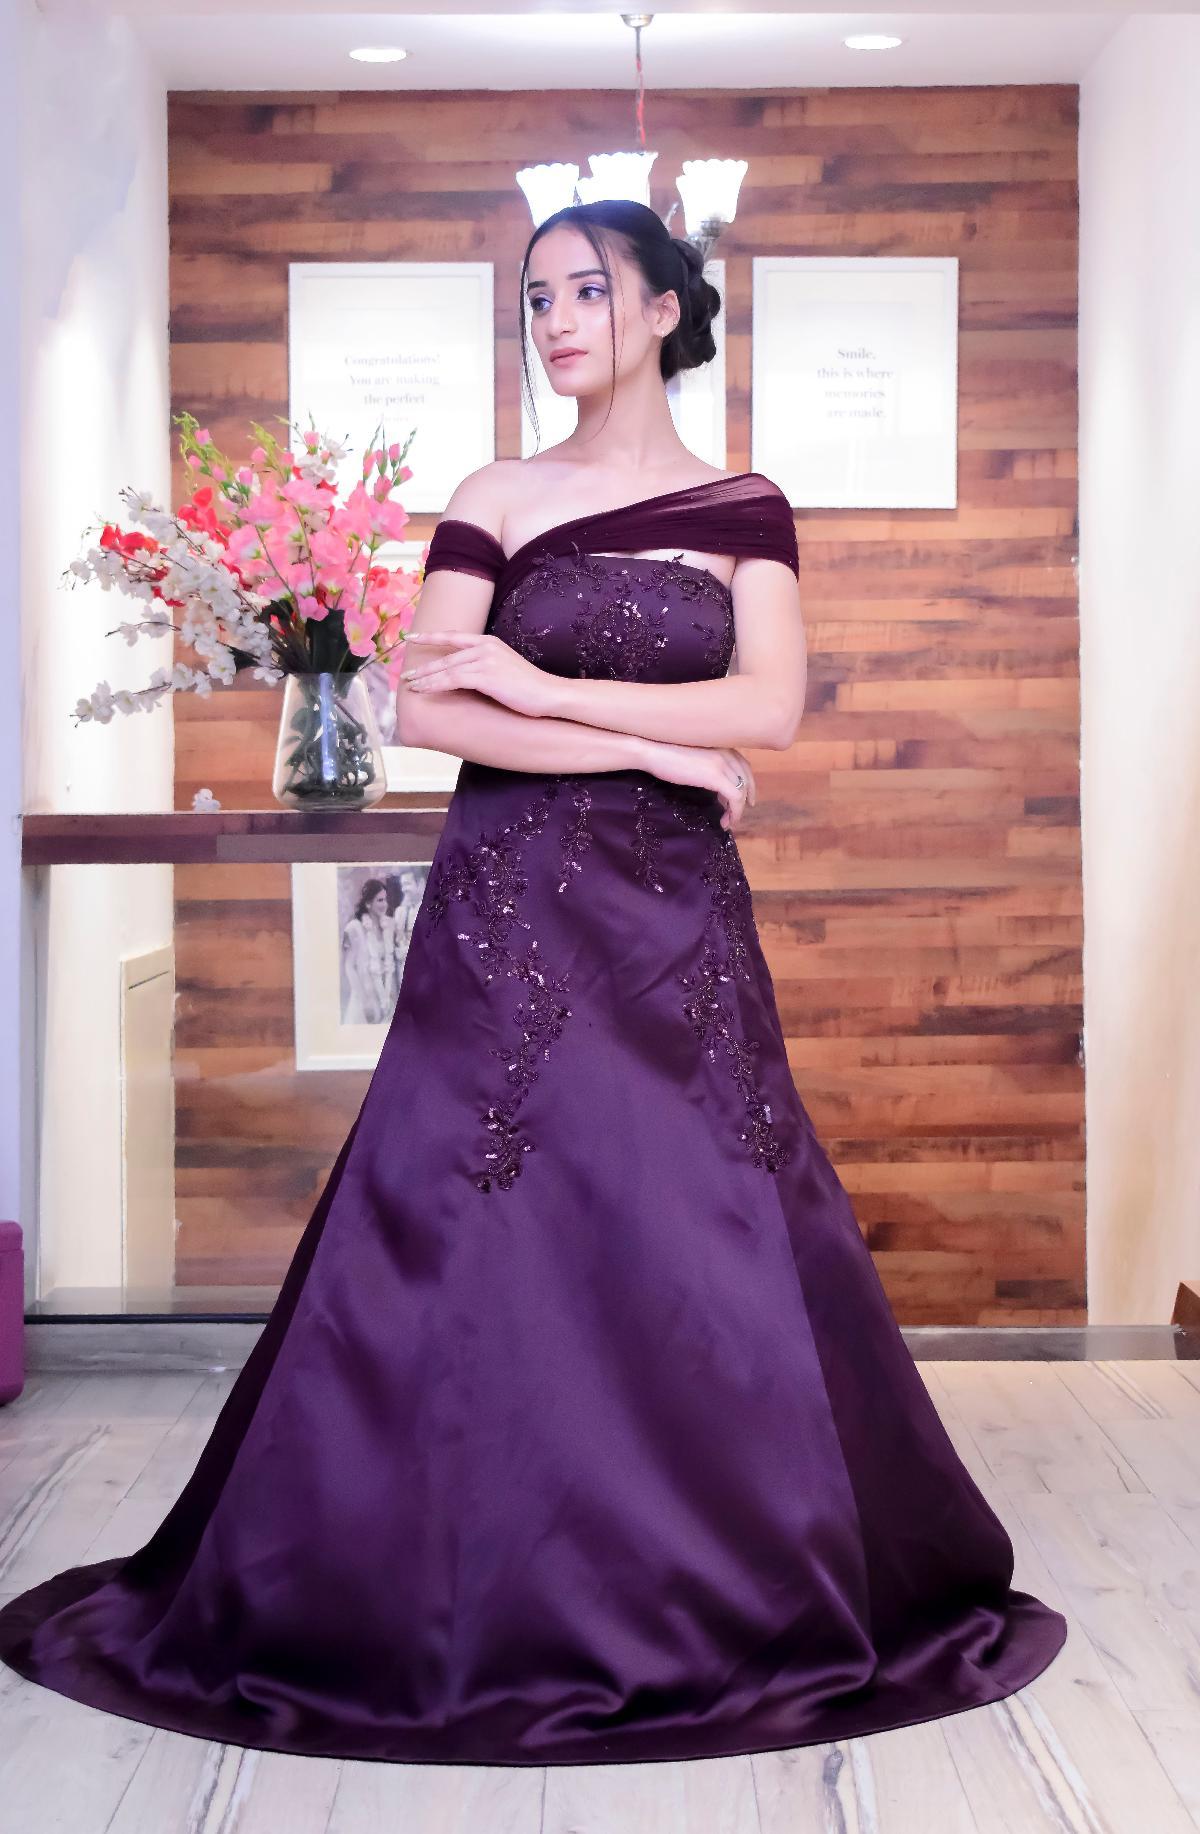 25 Best Purple gown for 18th birthday ideas  ball gowns purple gowns  gowns